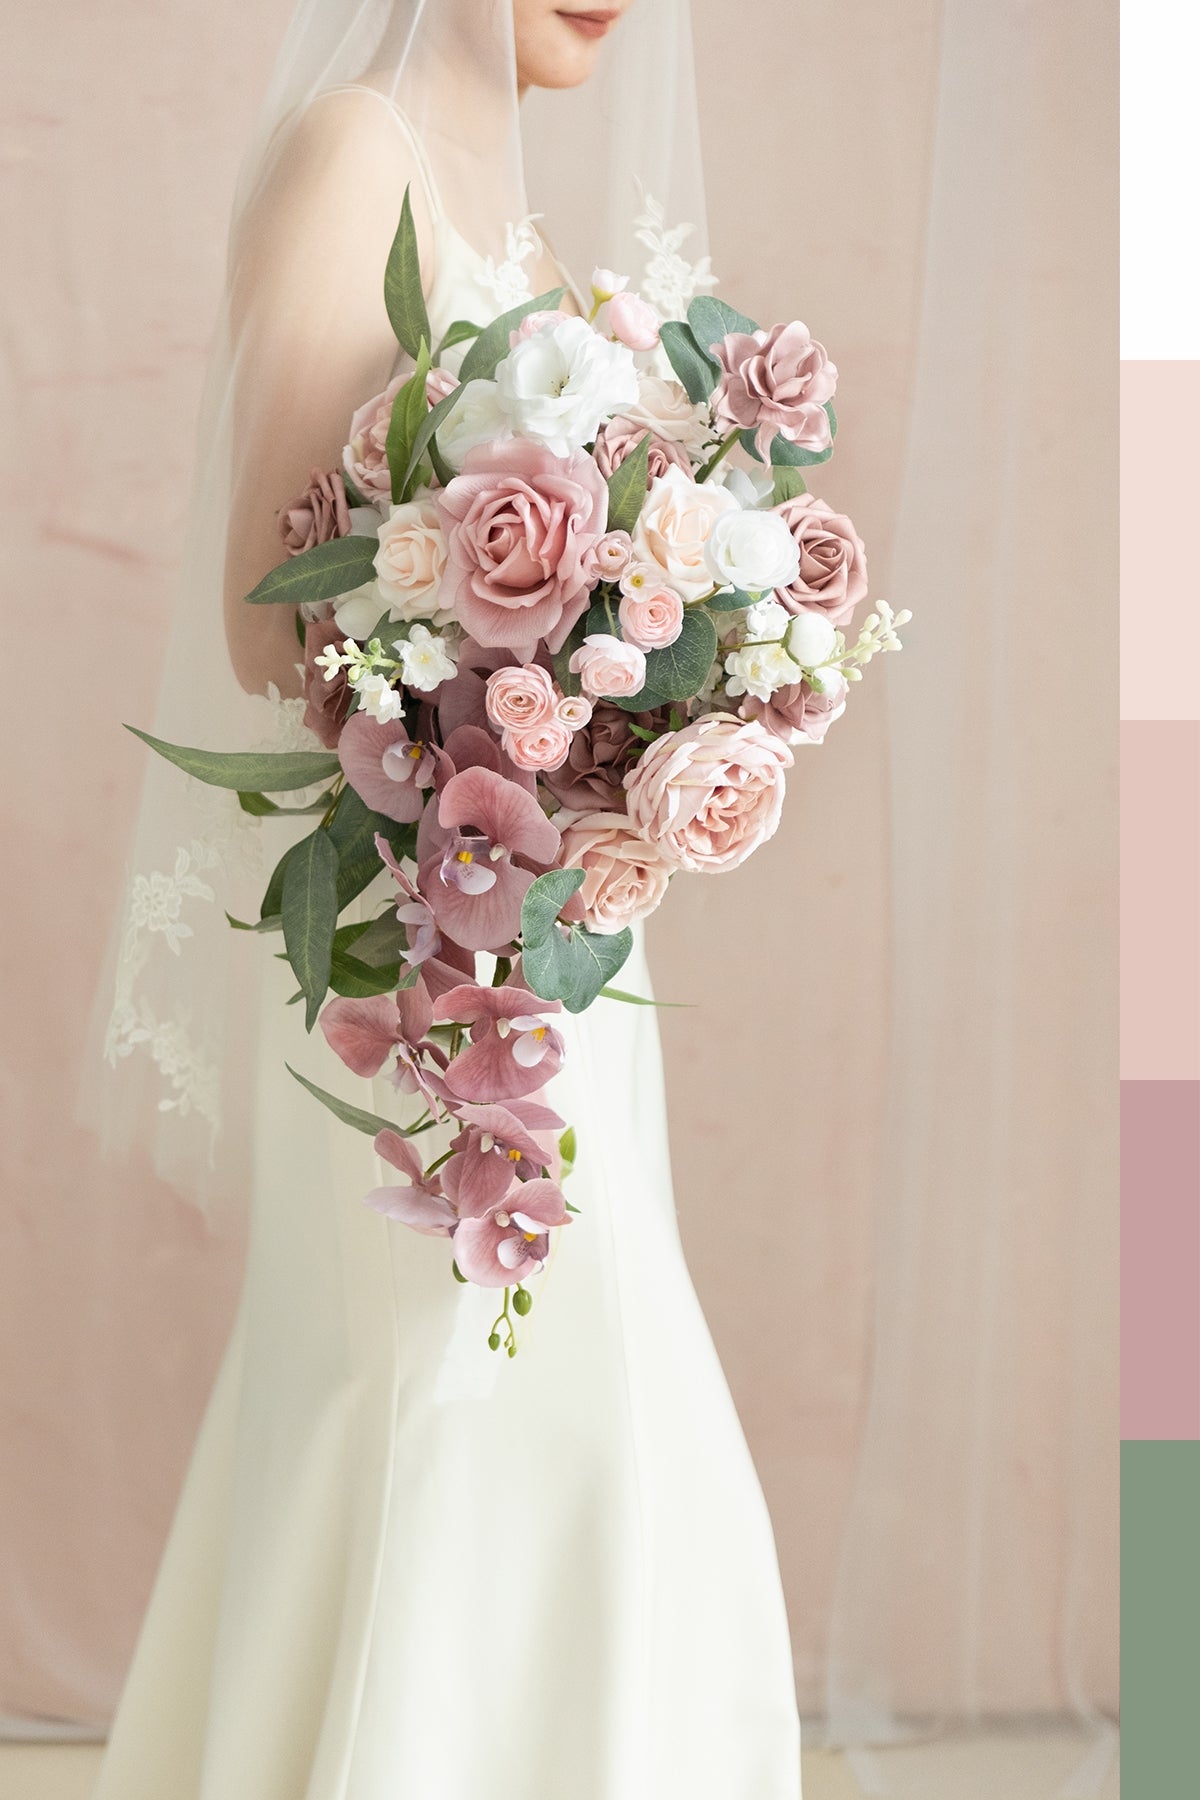 Bridal Flowers in Dusty Rose & Cream – Ling's Moment